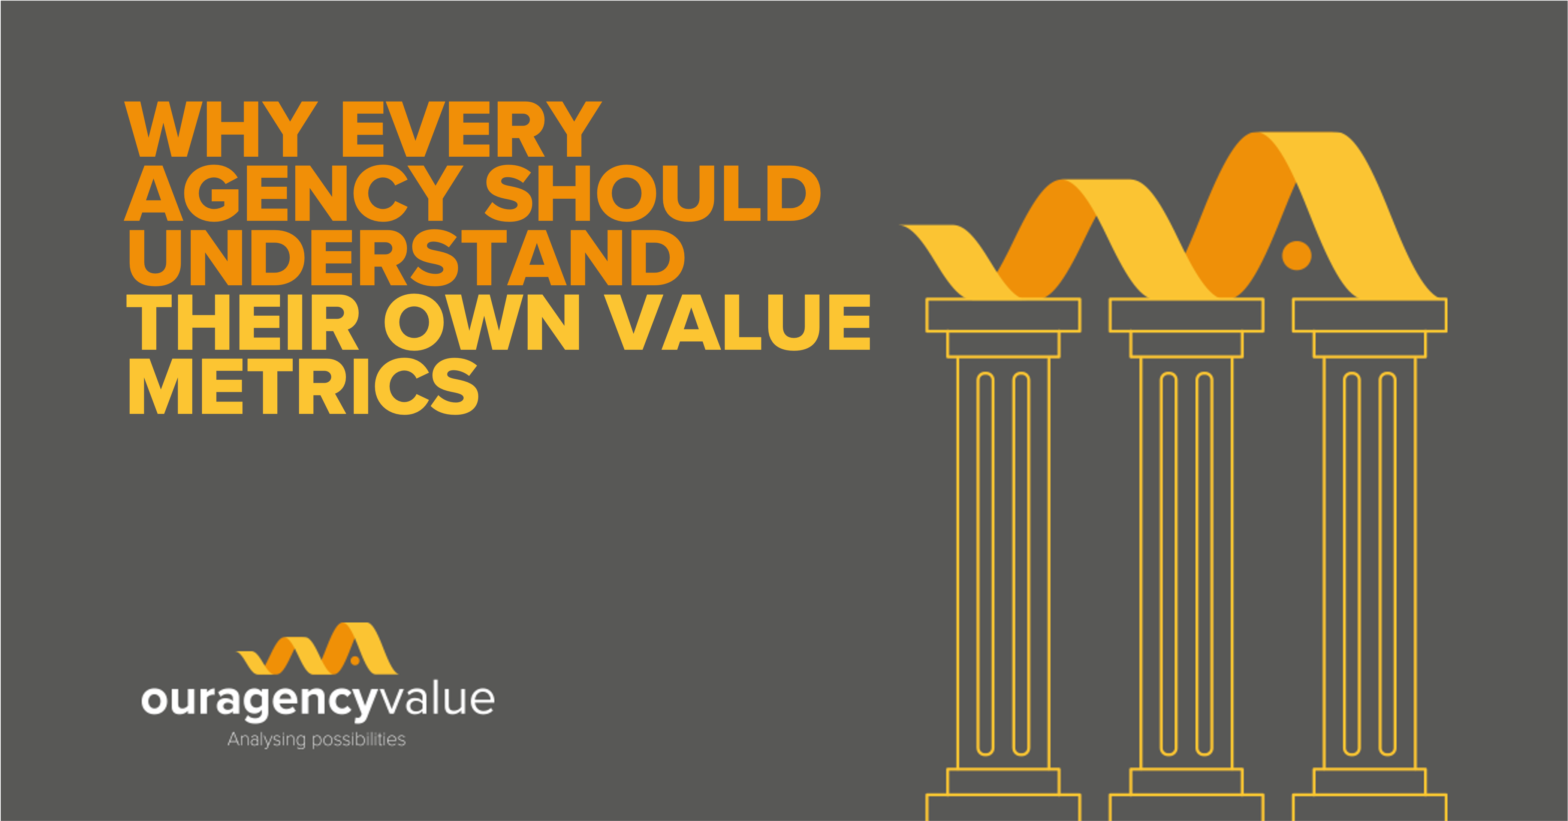 Why every Agency should understand their own value metrics